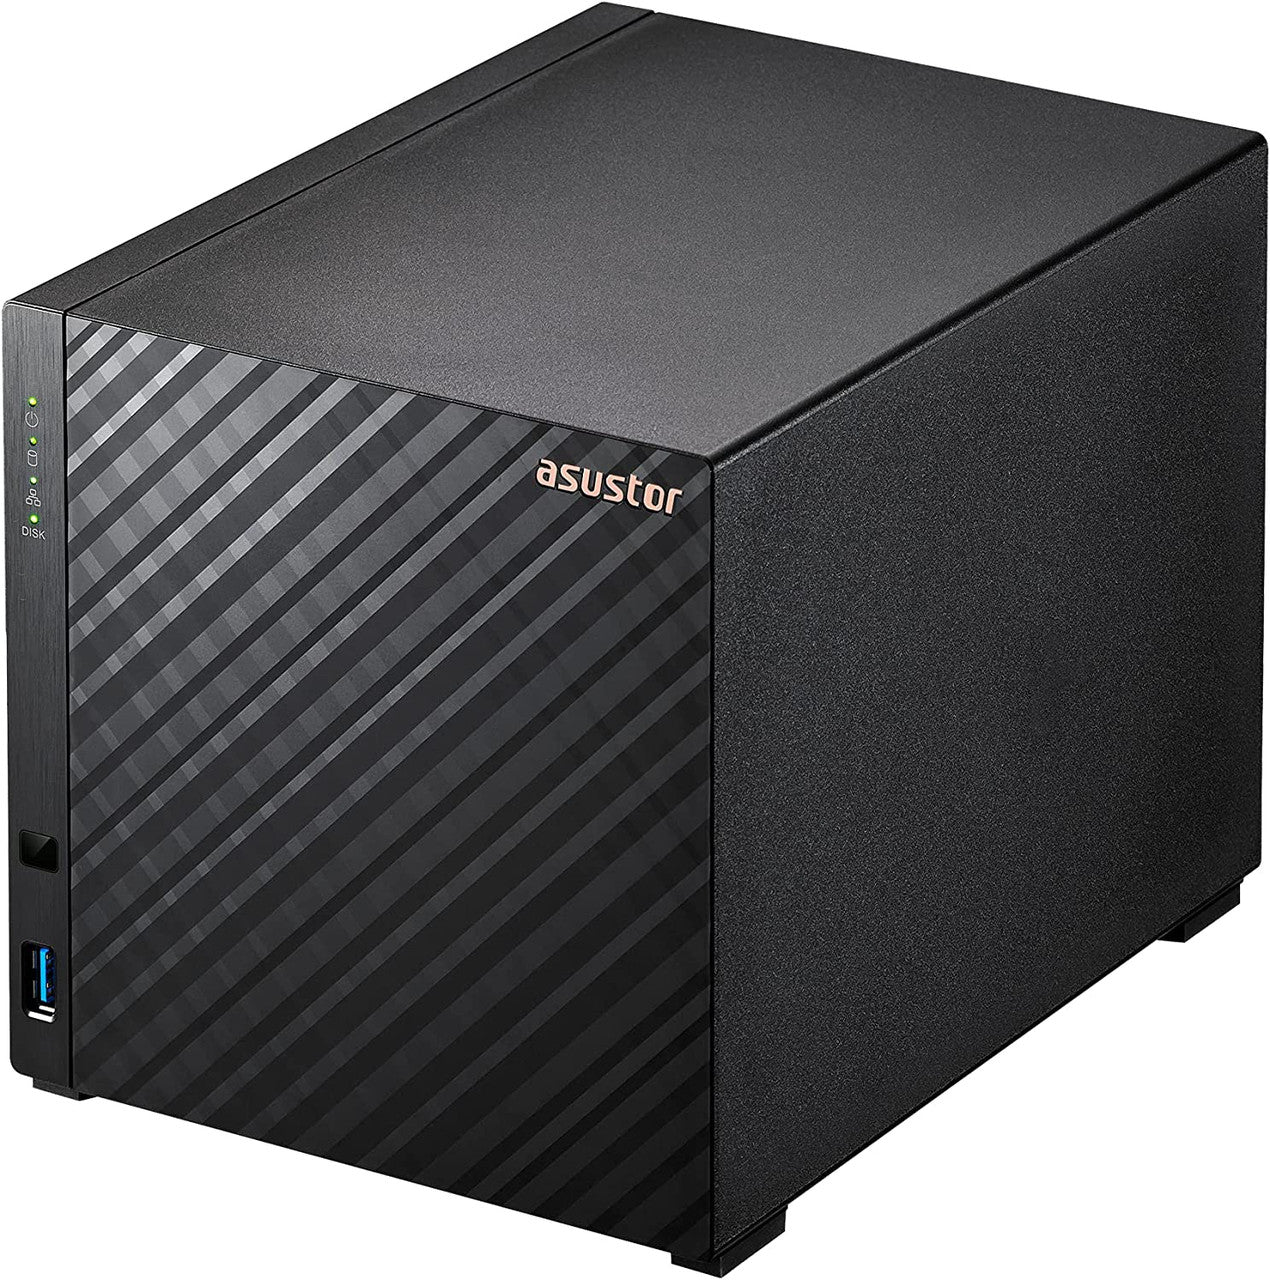 Asustor AS1104T 4-Bay Drivestor 4 NAS with 1GB RAM and 48TB (4x12TB) Seagate Ironwolf NAS Drives